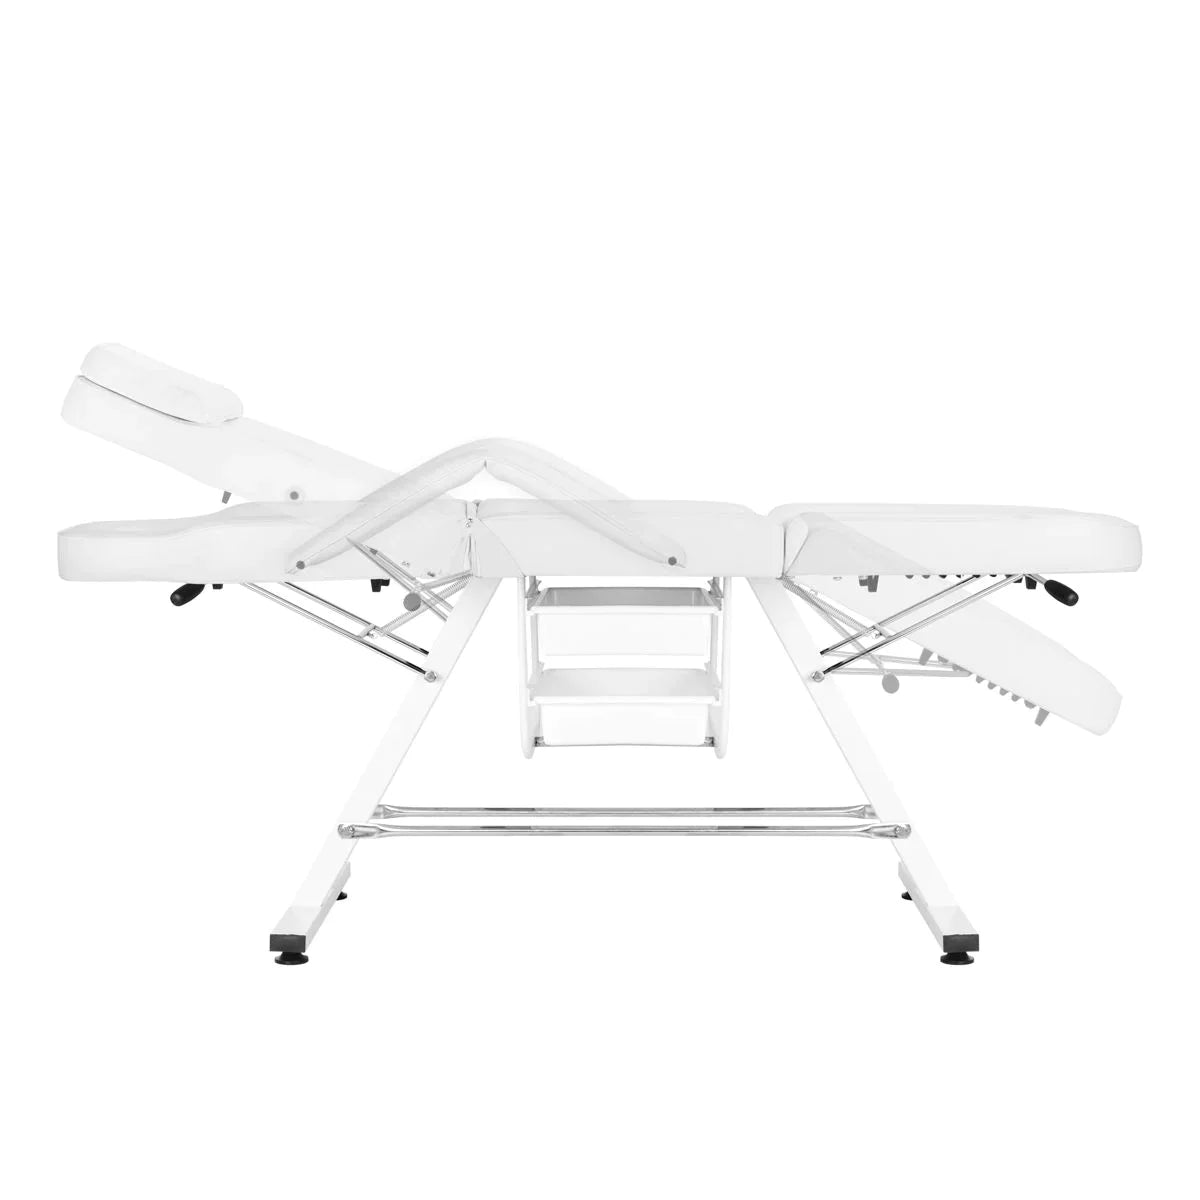 Universal stretcher with drawers